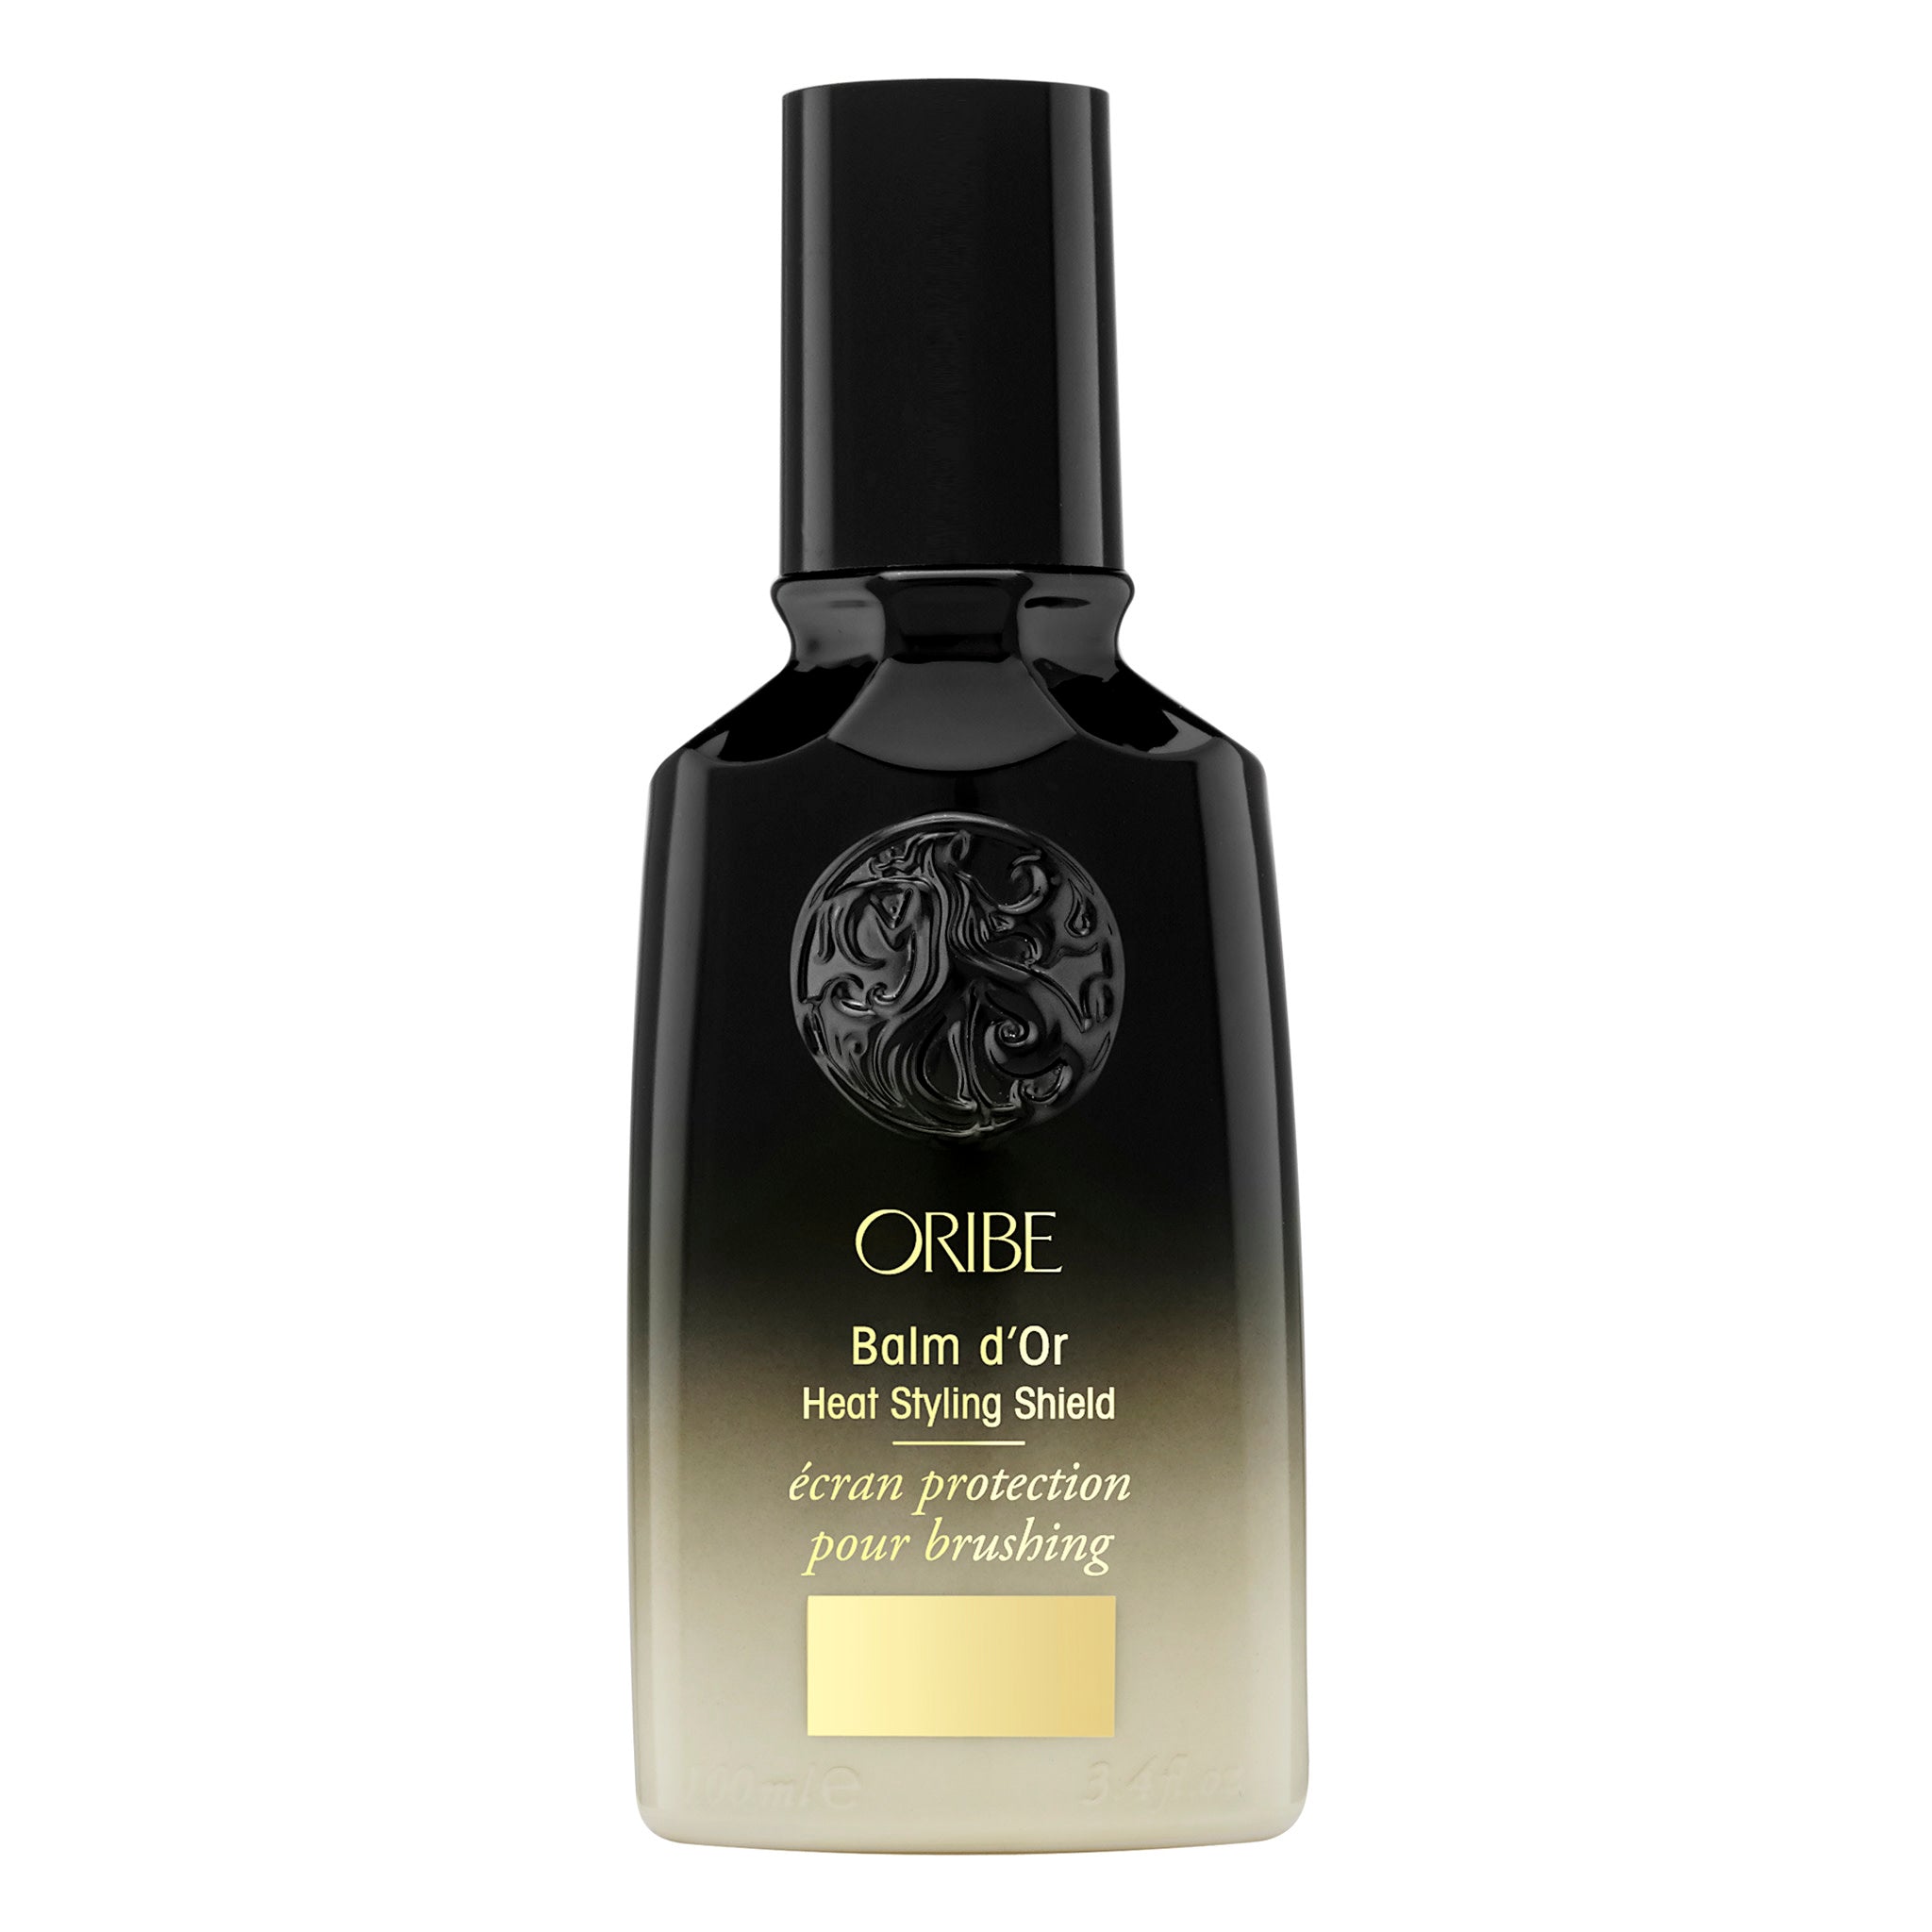 Oribe Balm d'Or main image. This product is for gray hair